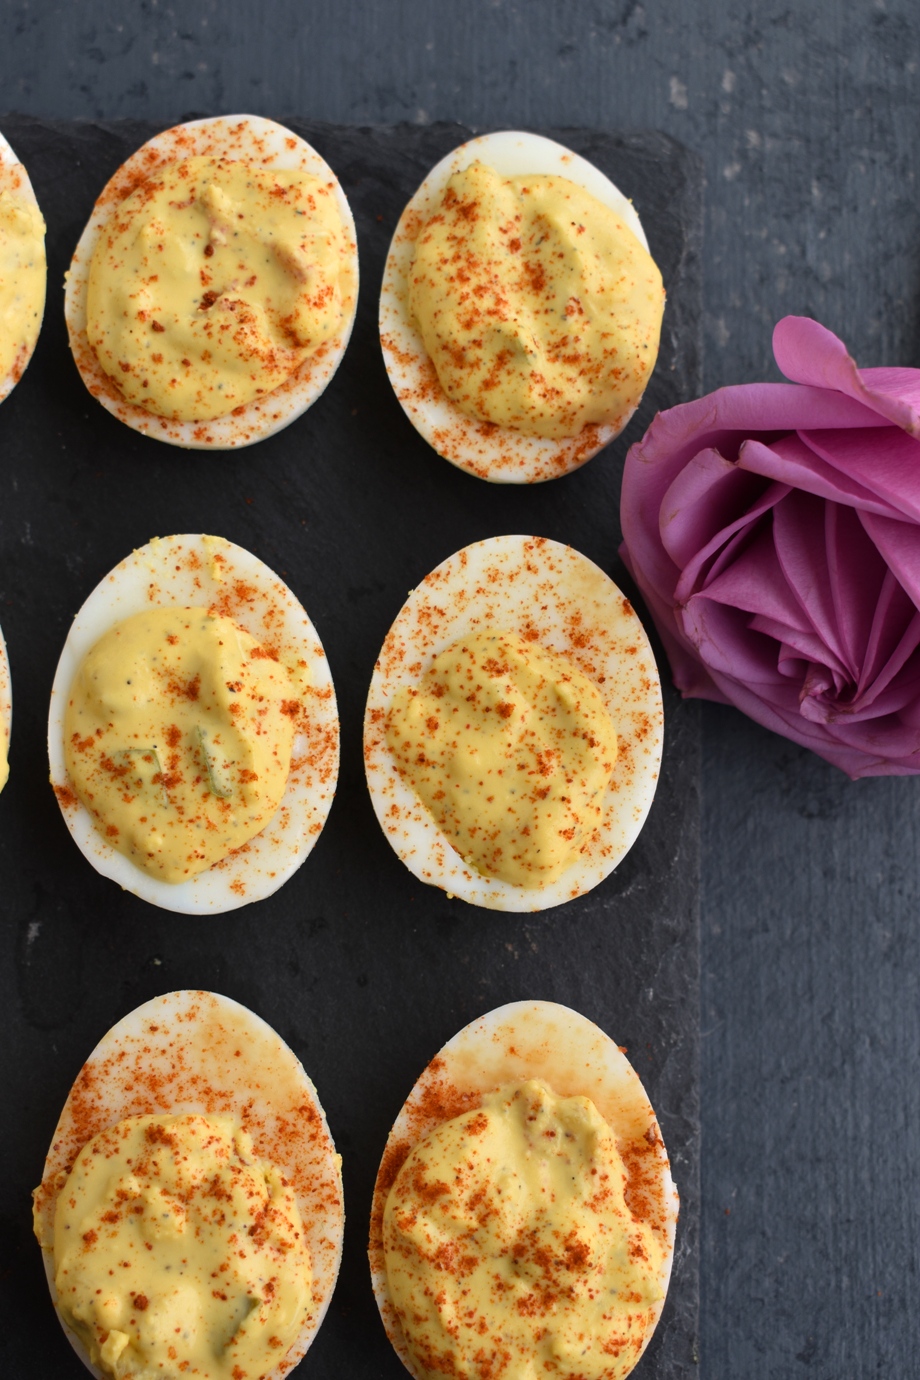 Healthy Deviled Eggs are super easy to make and loaded with flavor from dill pickles and mustard and use healthier ingredients for a lightened up deviled egg!